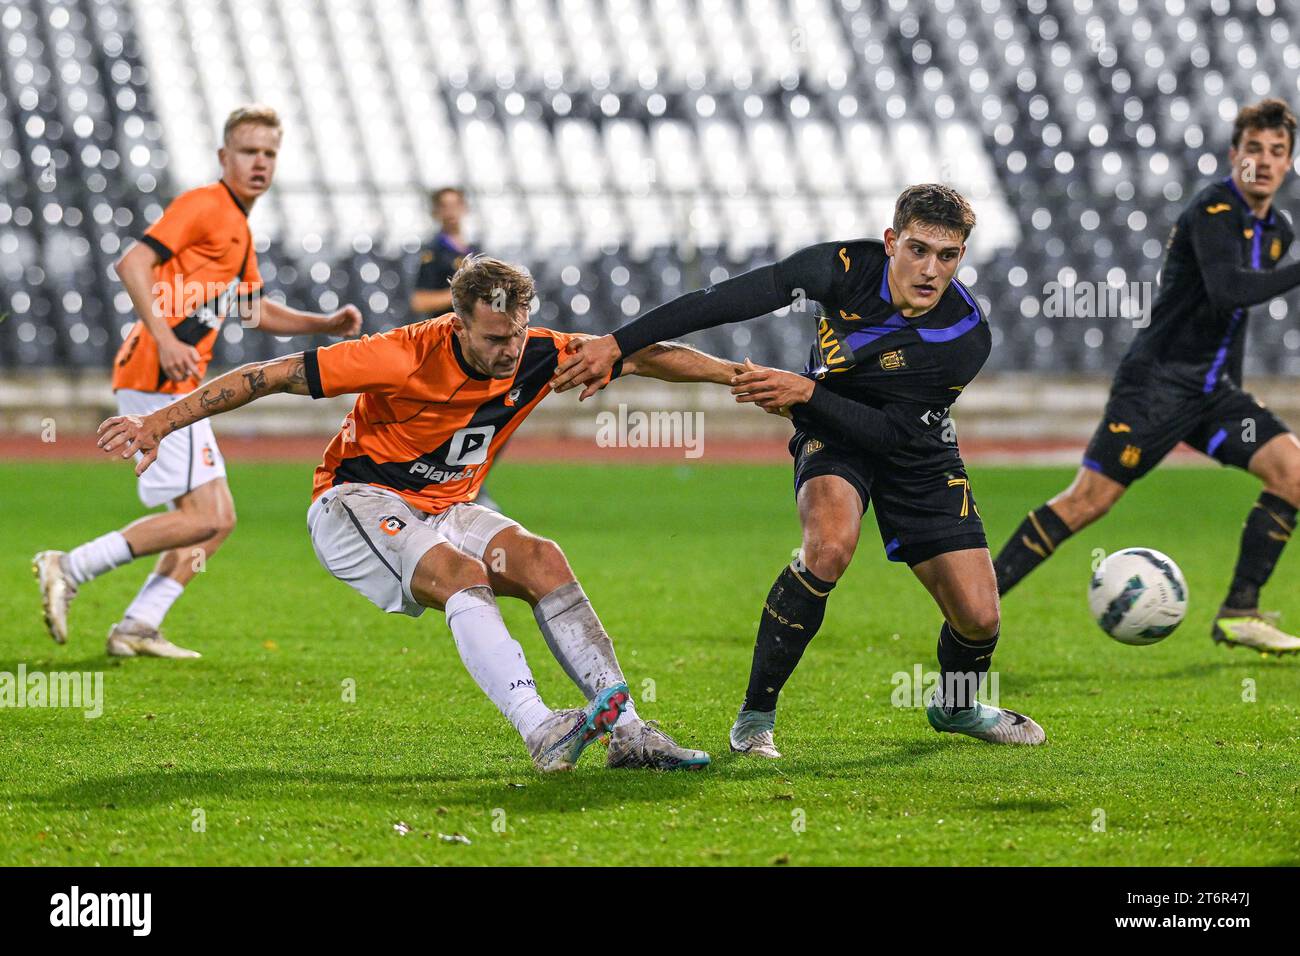 Lucas Lissens (47) of RSC Anderlecht pictured during a soccer game between  KMSK Deinze and RSC Anderlecht Futures youth team during the 22 nd matchday  in the Challenger Pro League for the